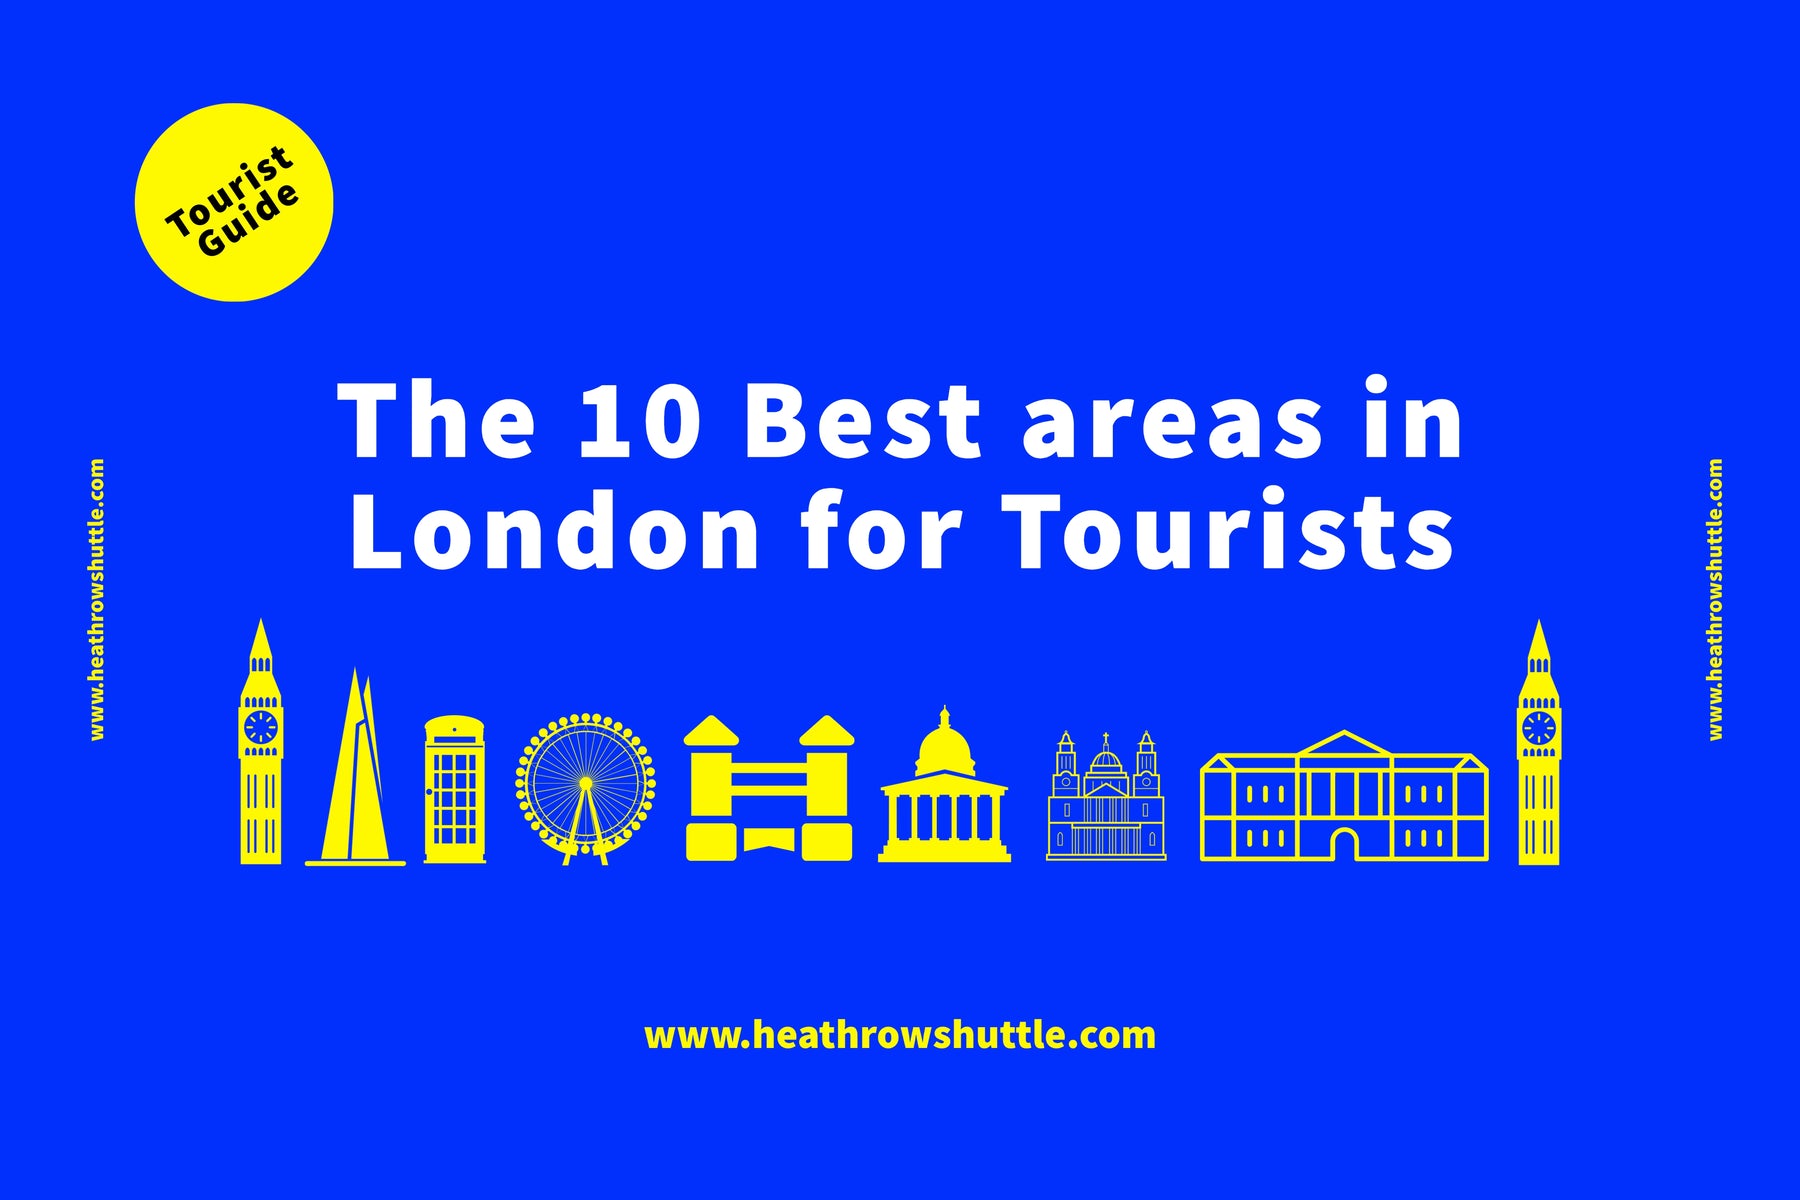 The 10 Best areas in London for Tourists